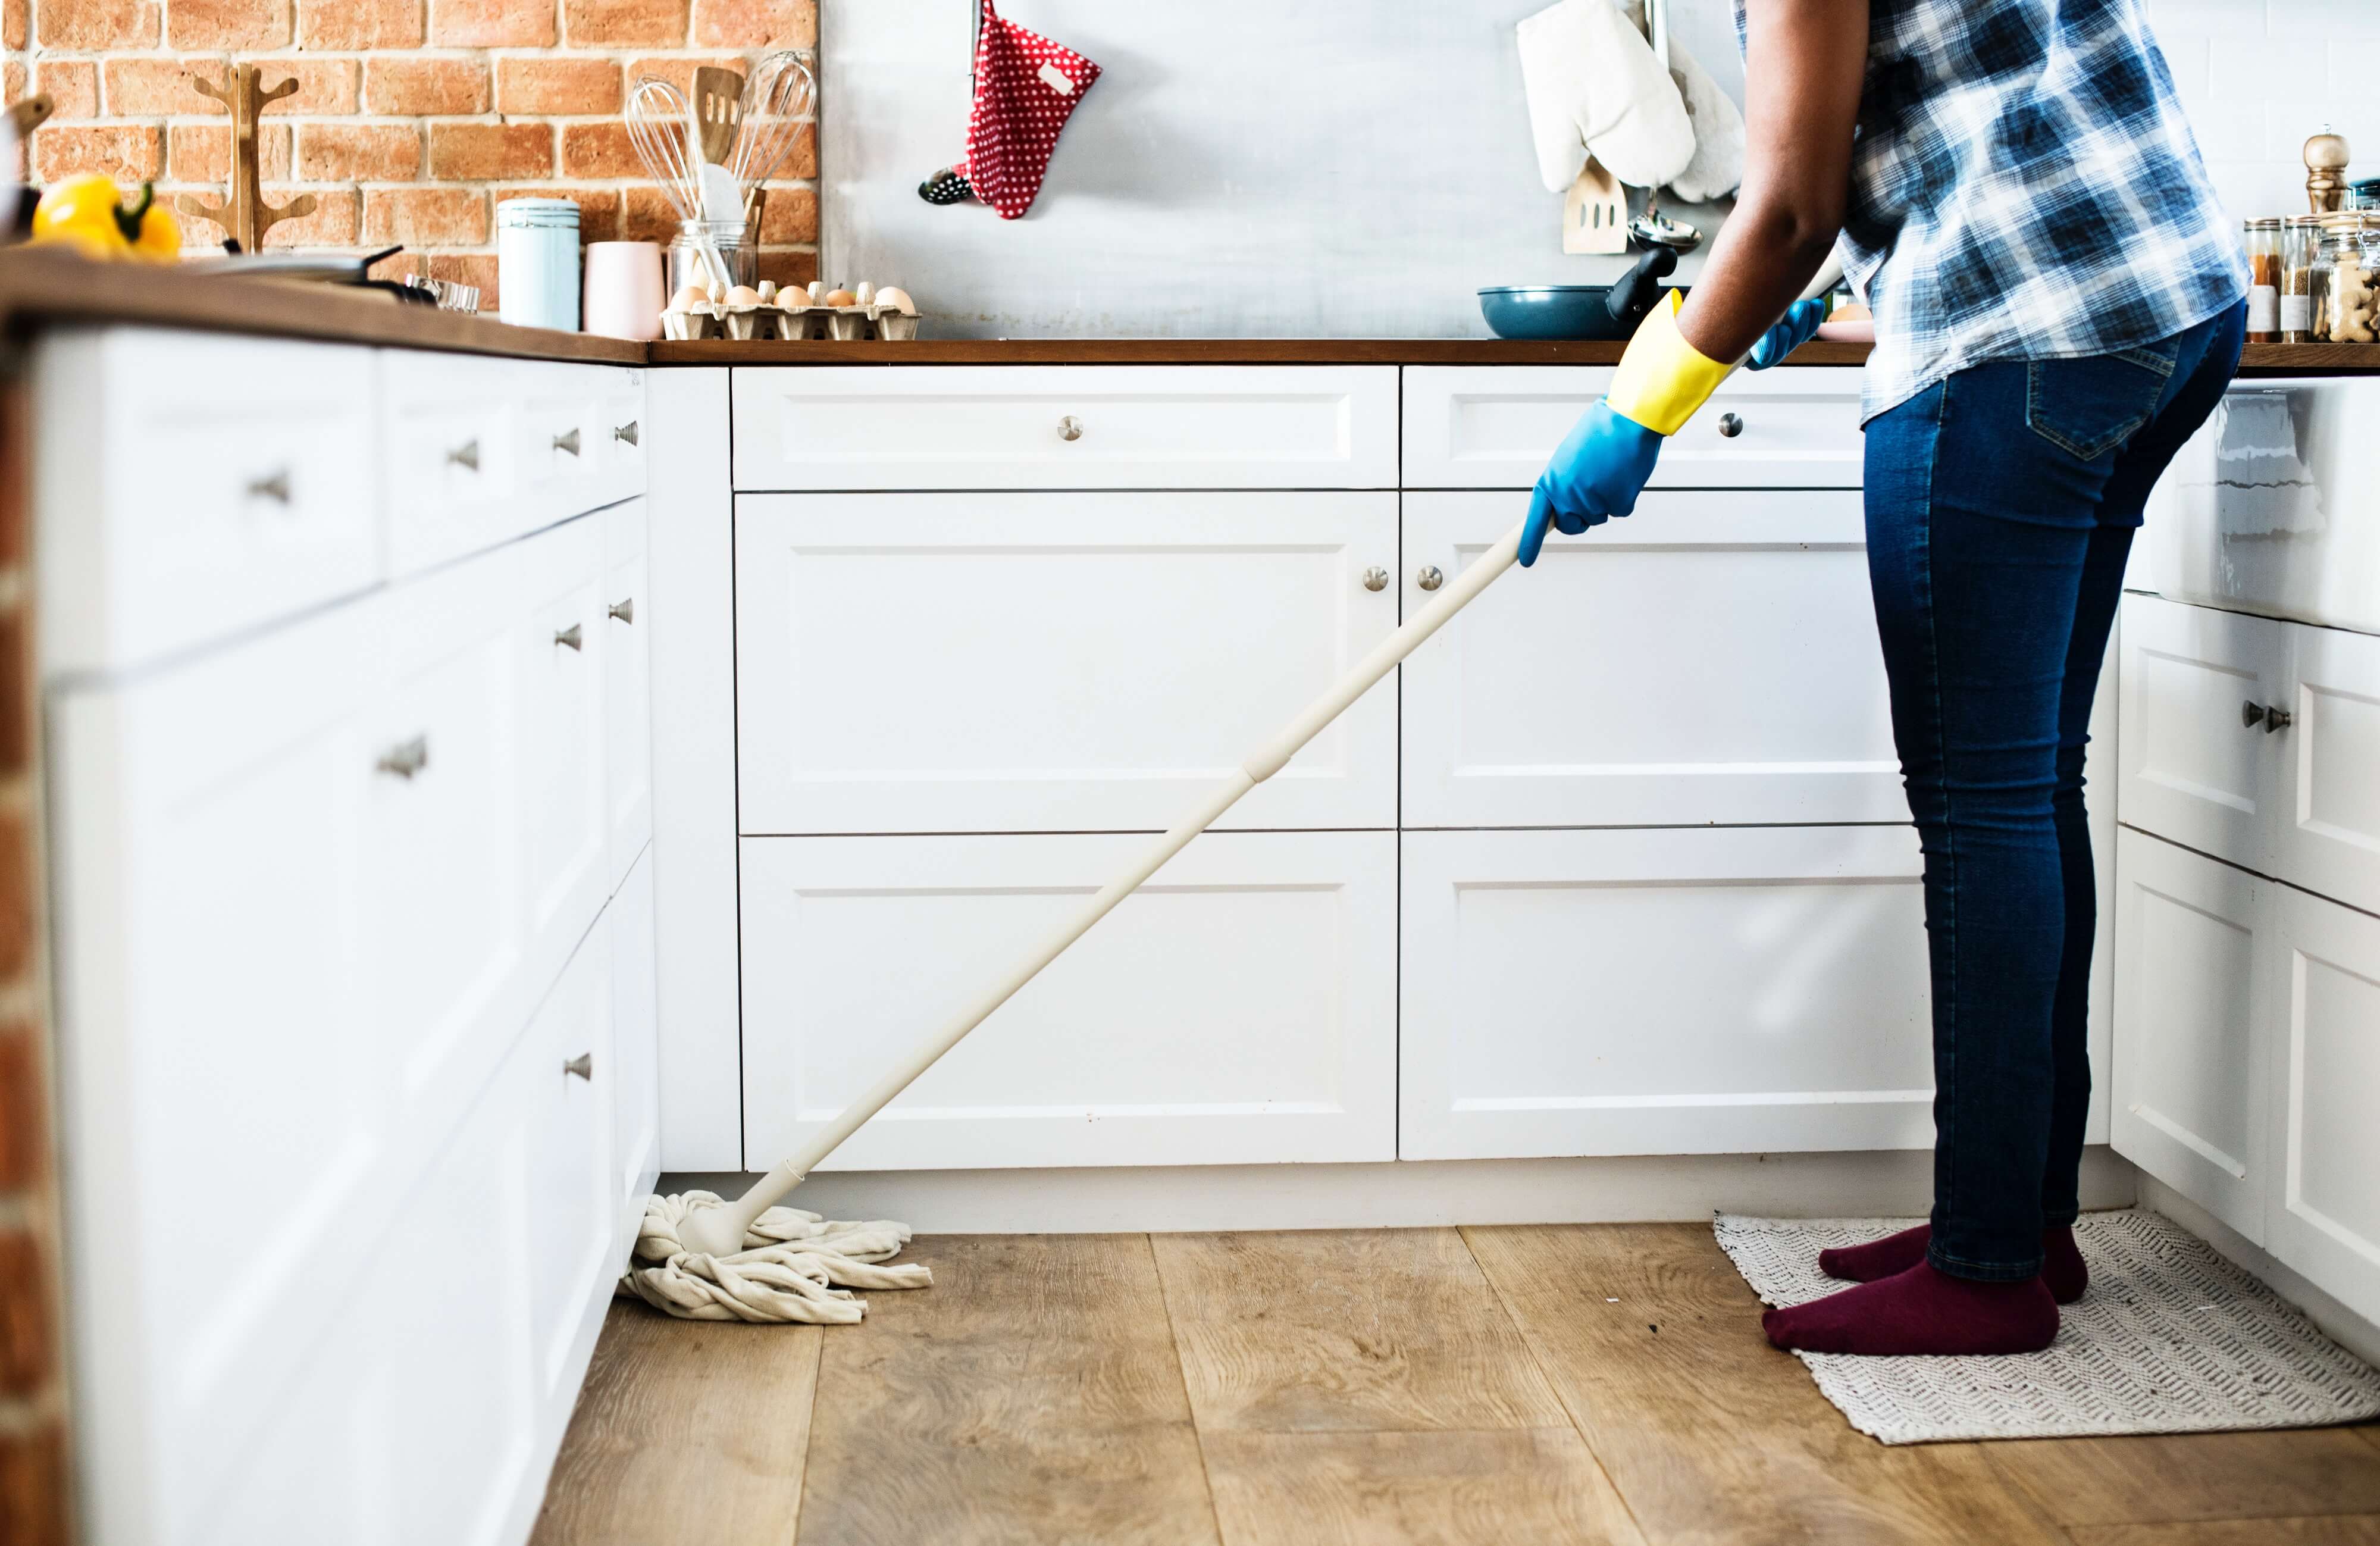 Brabos Boston Maid Cleaning Services